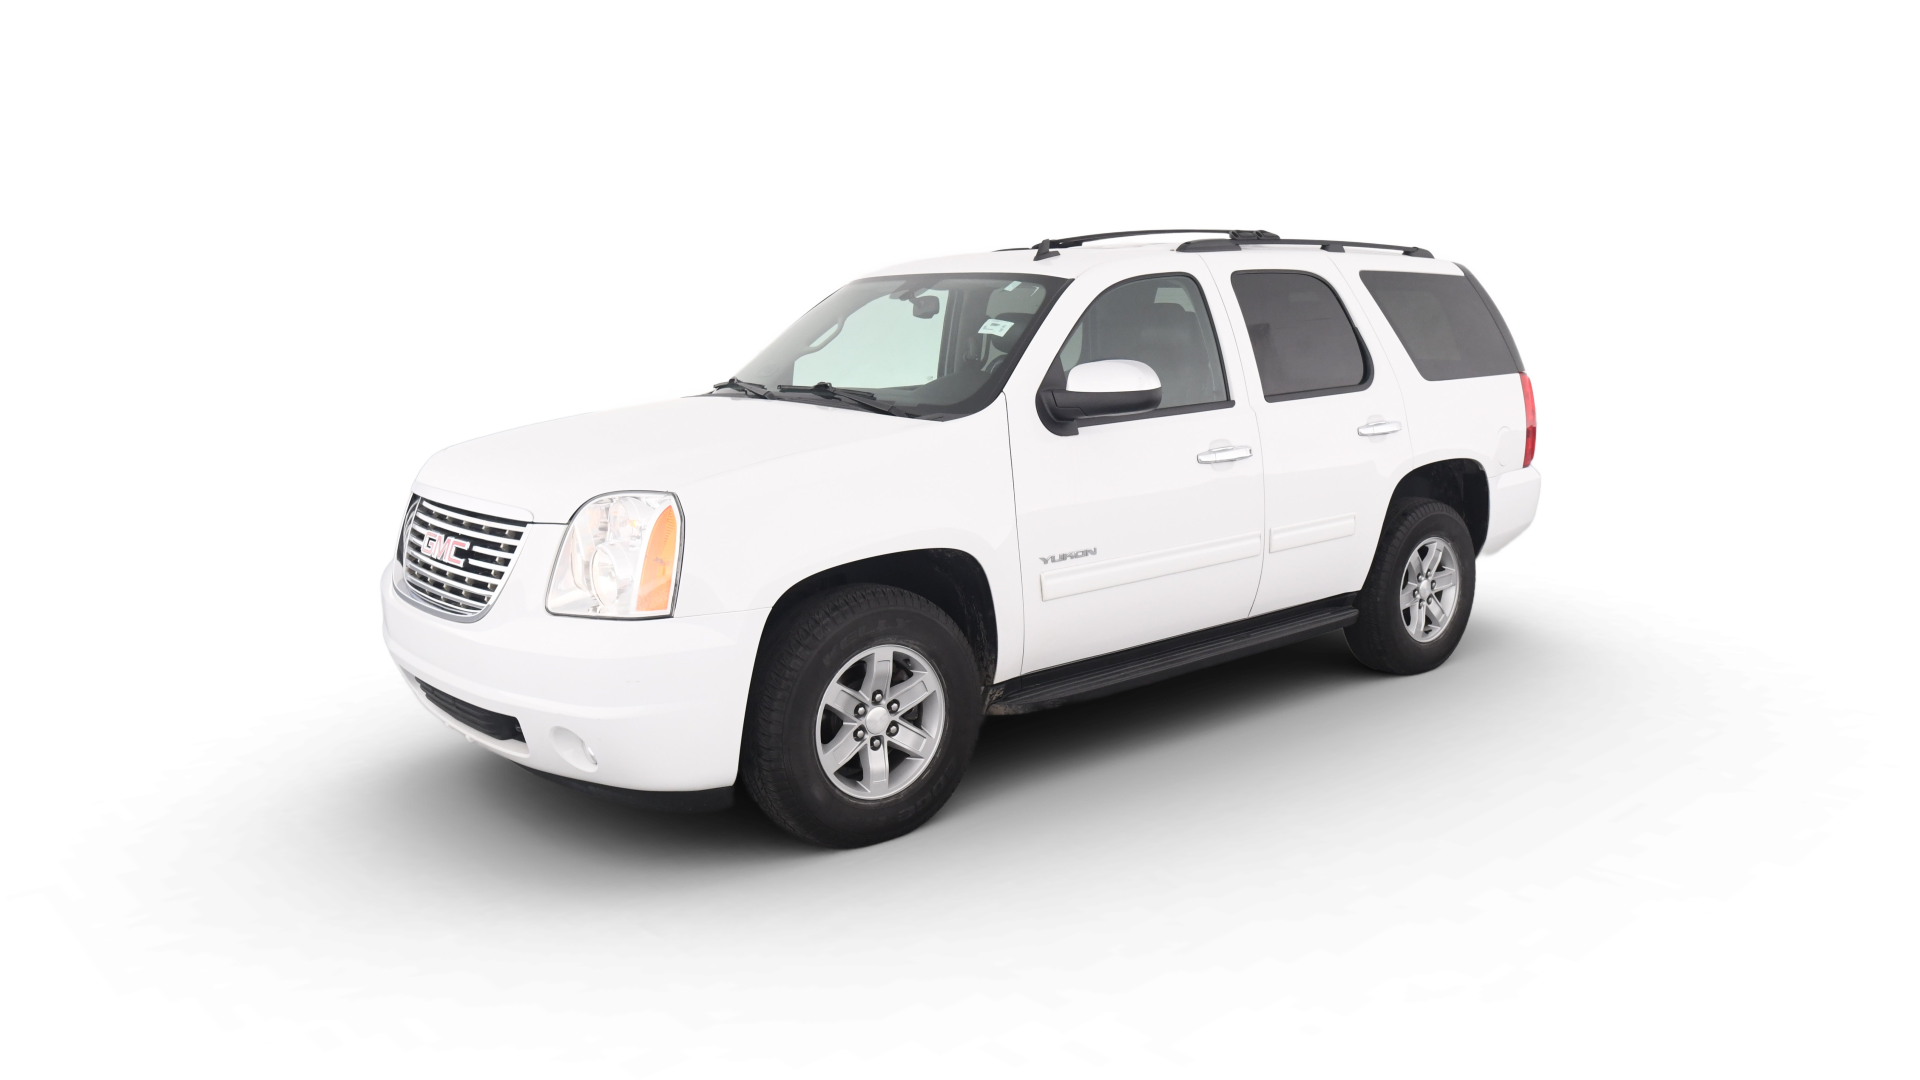 Used 2012 GMC For Sale Online | Carvana